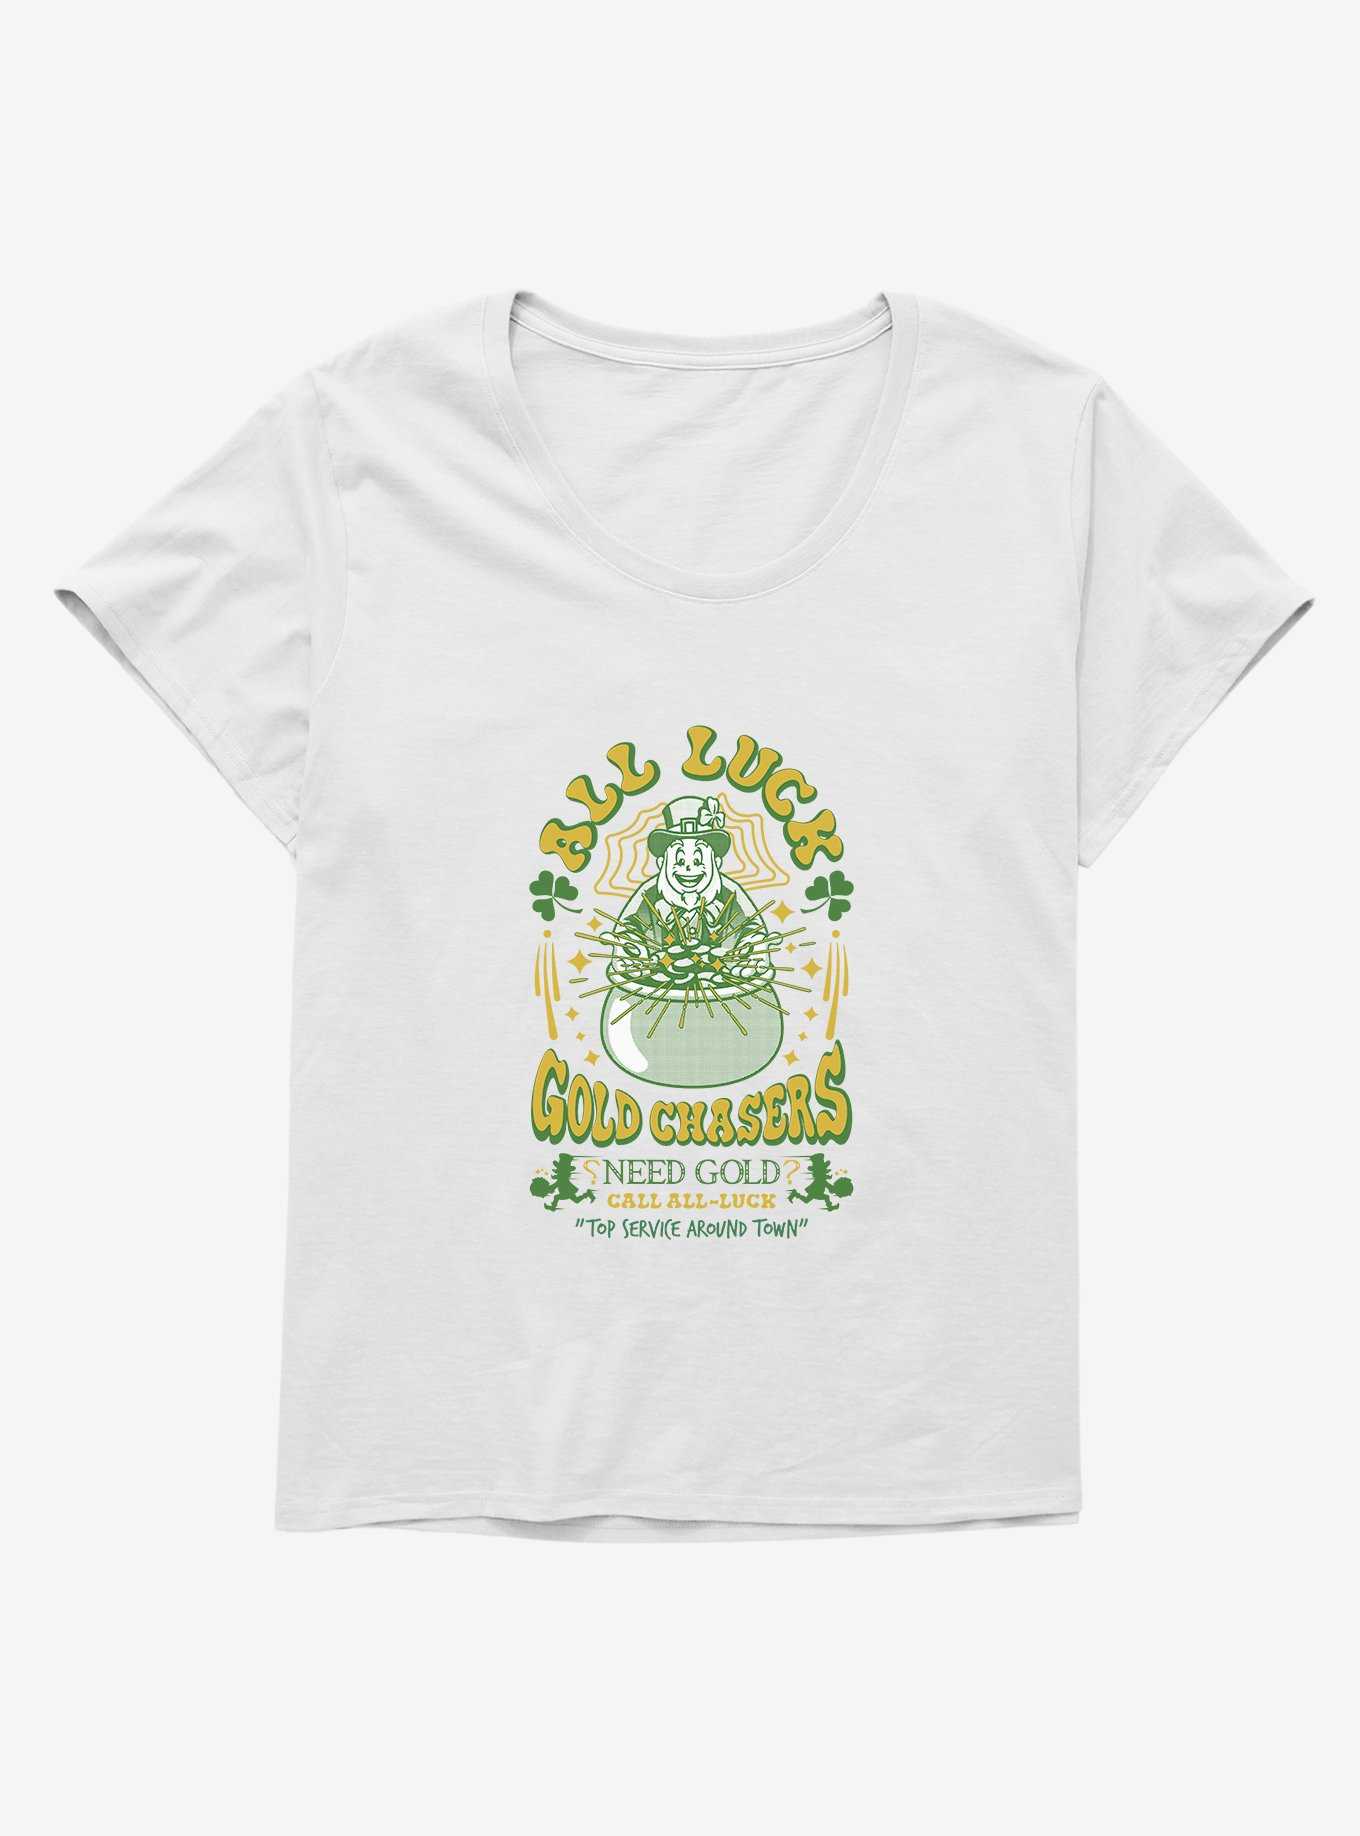 St. Patty's All Luck Gold Chasers Girls T-Shirt Plus Size, , hi-res